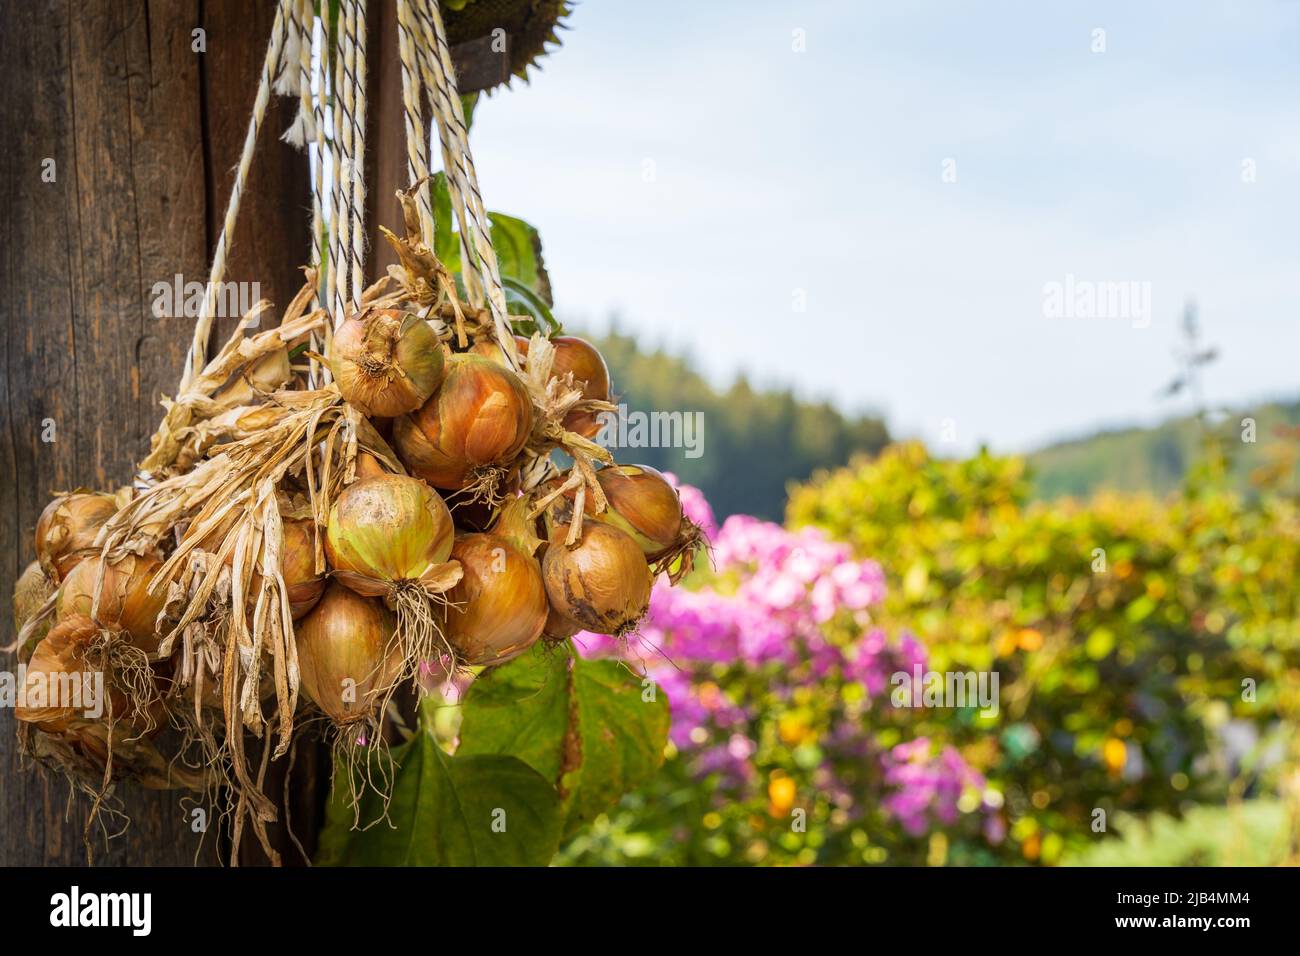 A string of golden onions hanging to dry outside Stock Photo